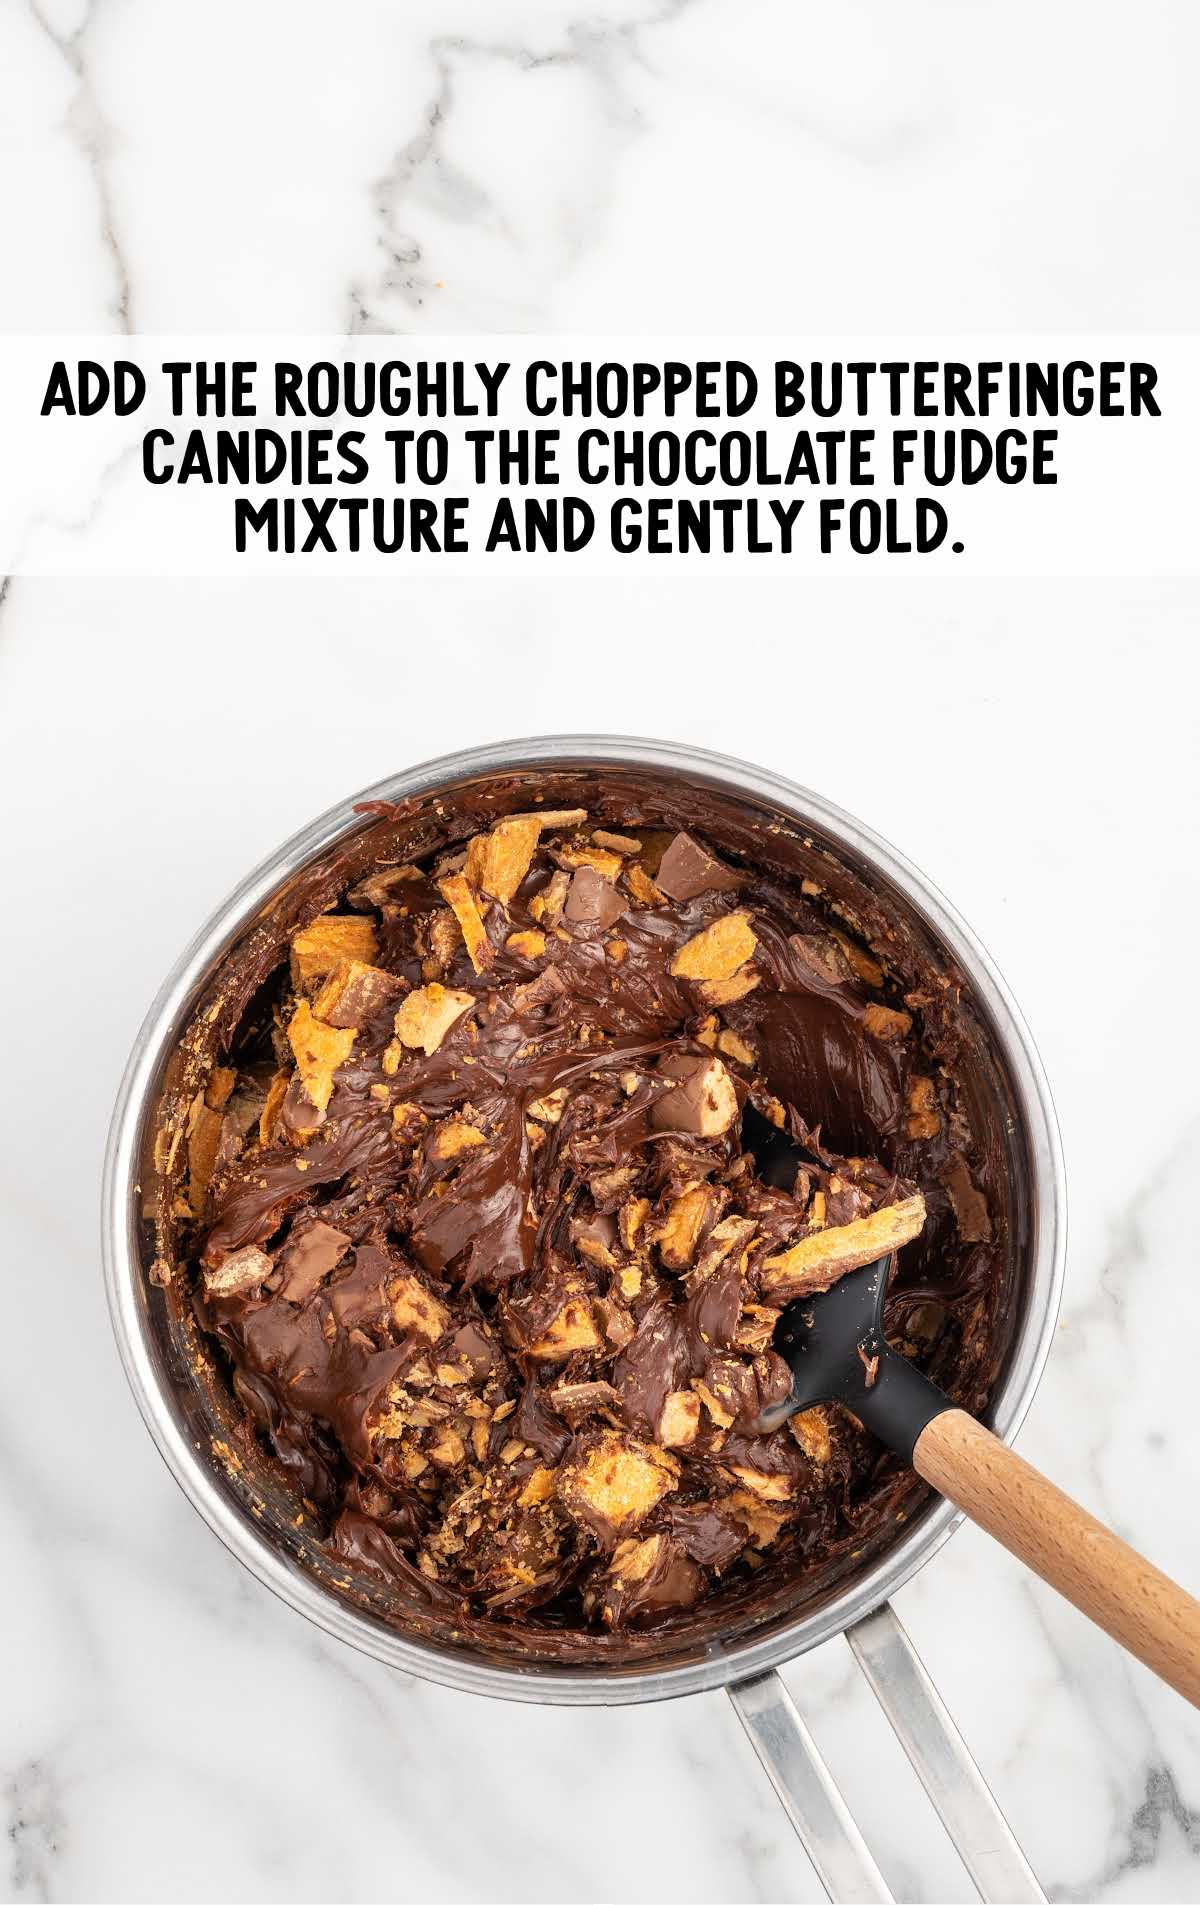 chopped butterfinger candies added to the chocolate fudge mixture in the saucepan